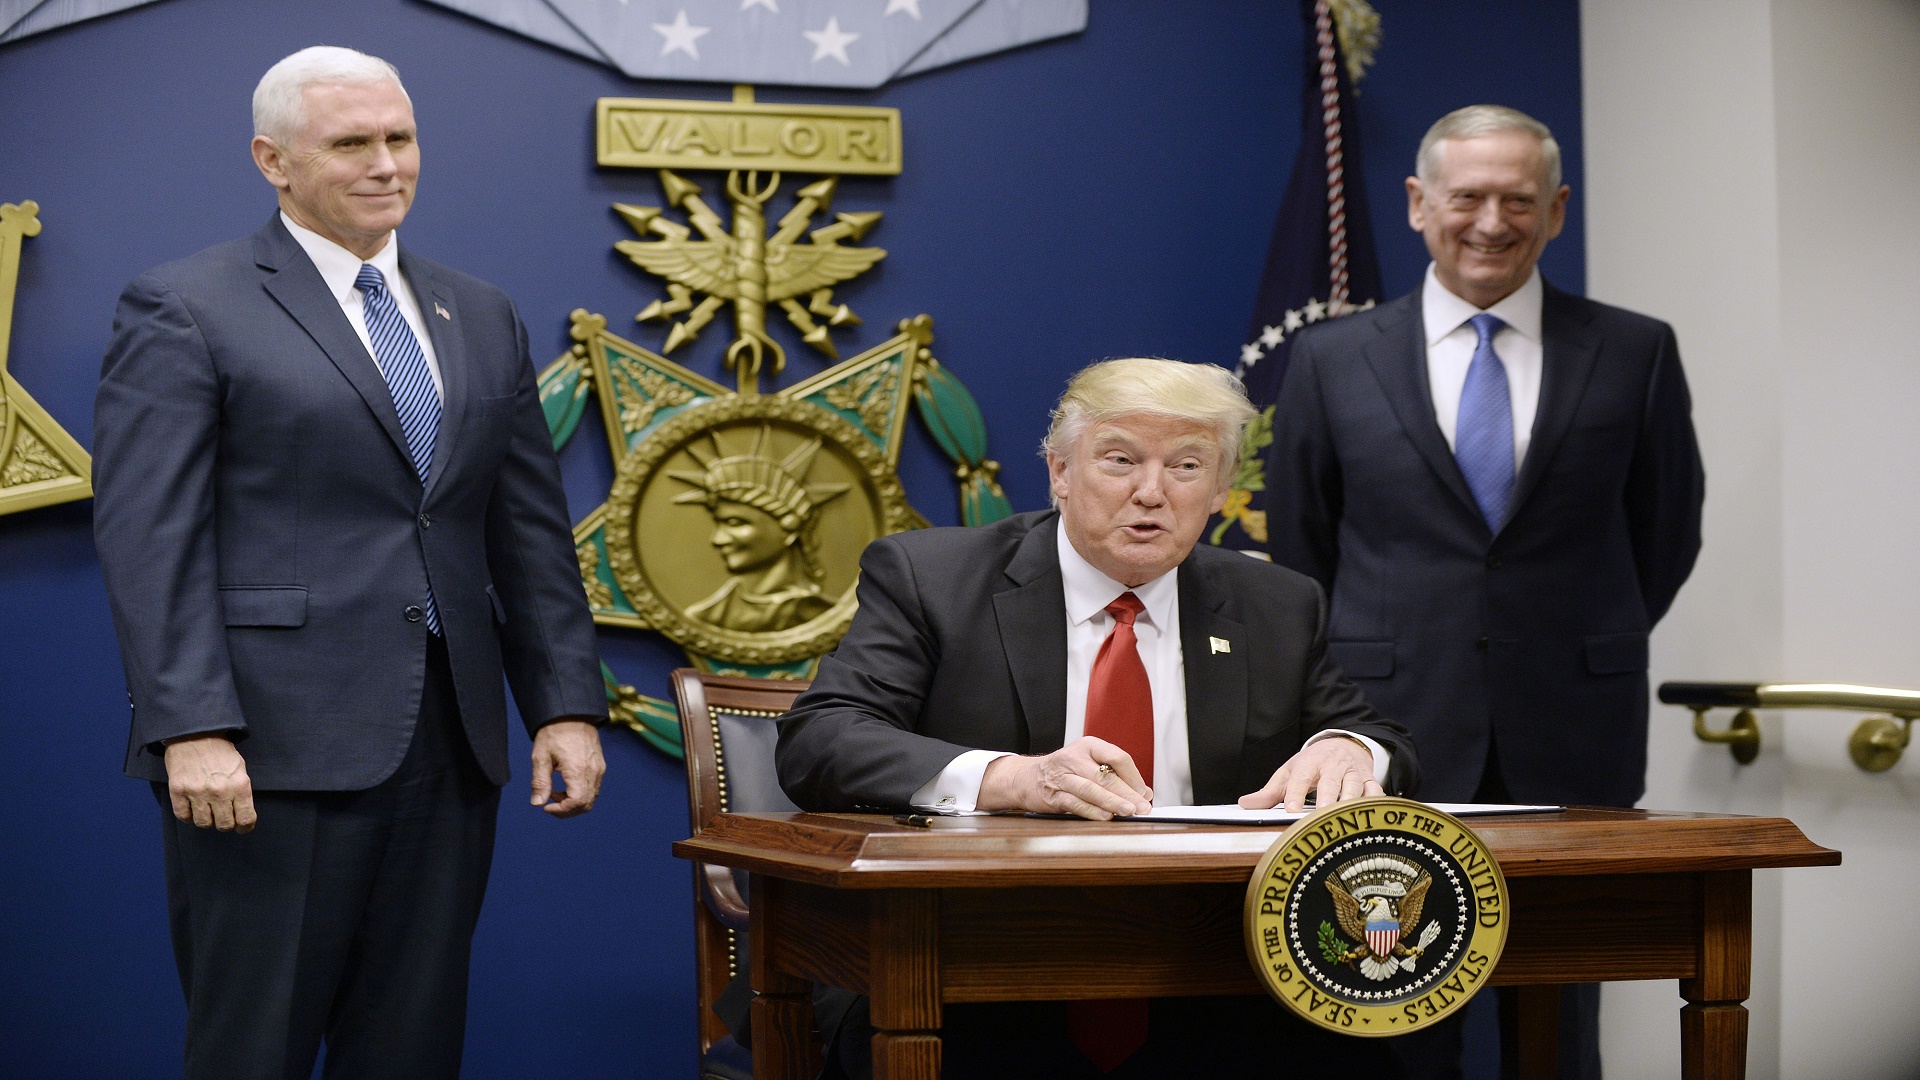 ARLINGTON, VA - JANUARY 27: U.S. President Donald Trump signs executive orders as Defense Secretary Gen. James Mattis and Vice President Mike Pence look on in the Hall of Heroes at the Department of Defense on January 27, 2017 in Arlington, Virginia. Trump signed two orders calling for the "great rebuilding" of the nation's military and the "extreme vetting" of visa seekers from terror-plagued countries. (Photo by Olivier Douliery-Pool/Getty Images)